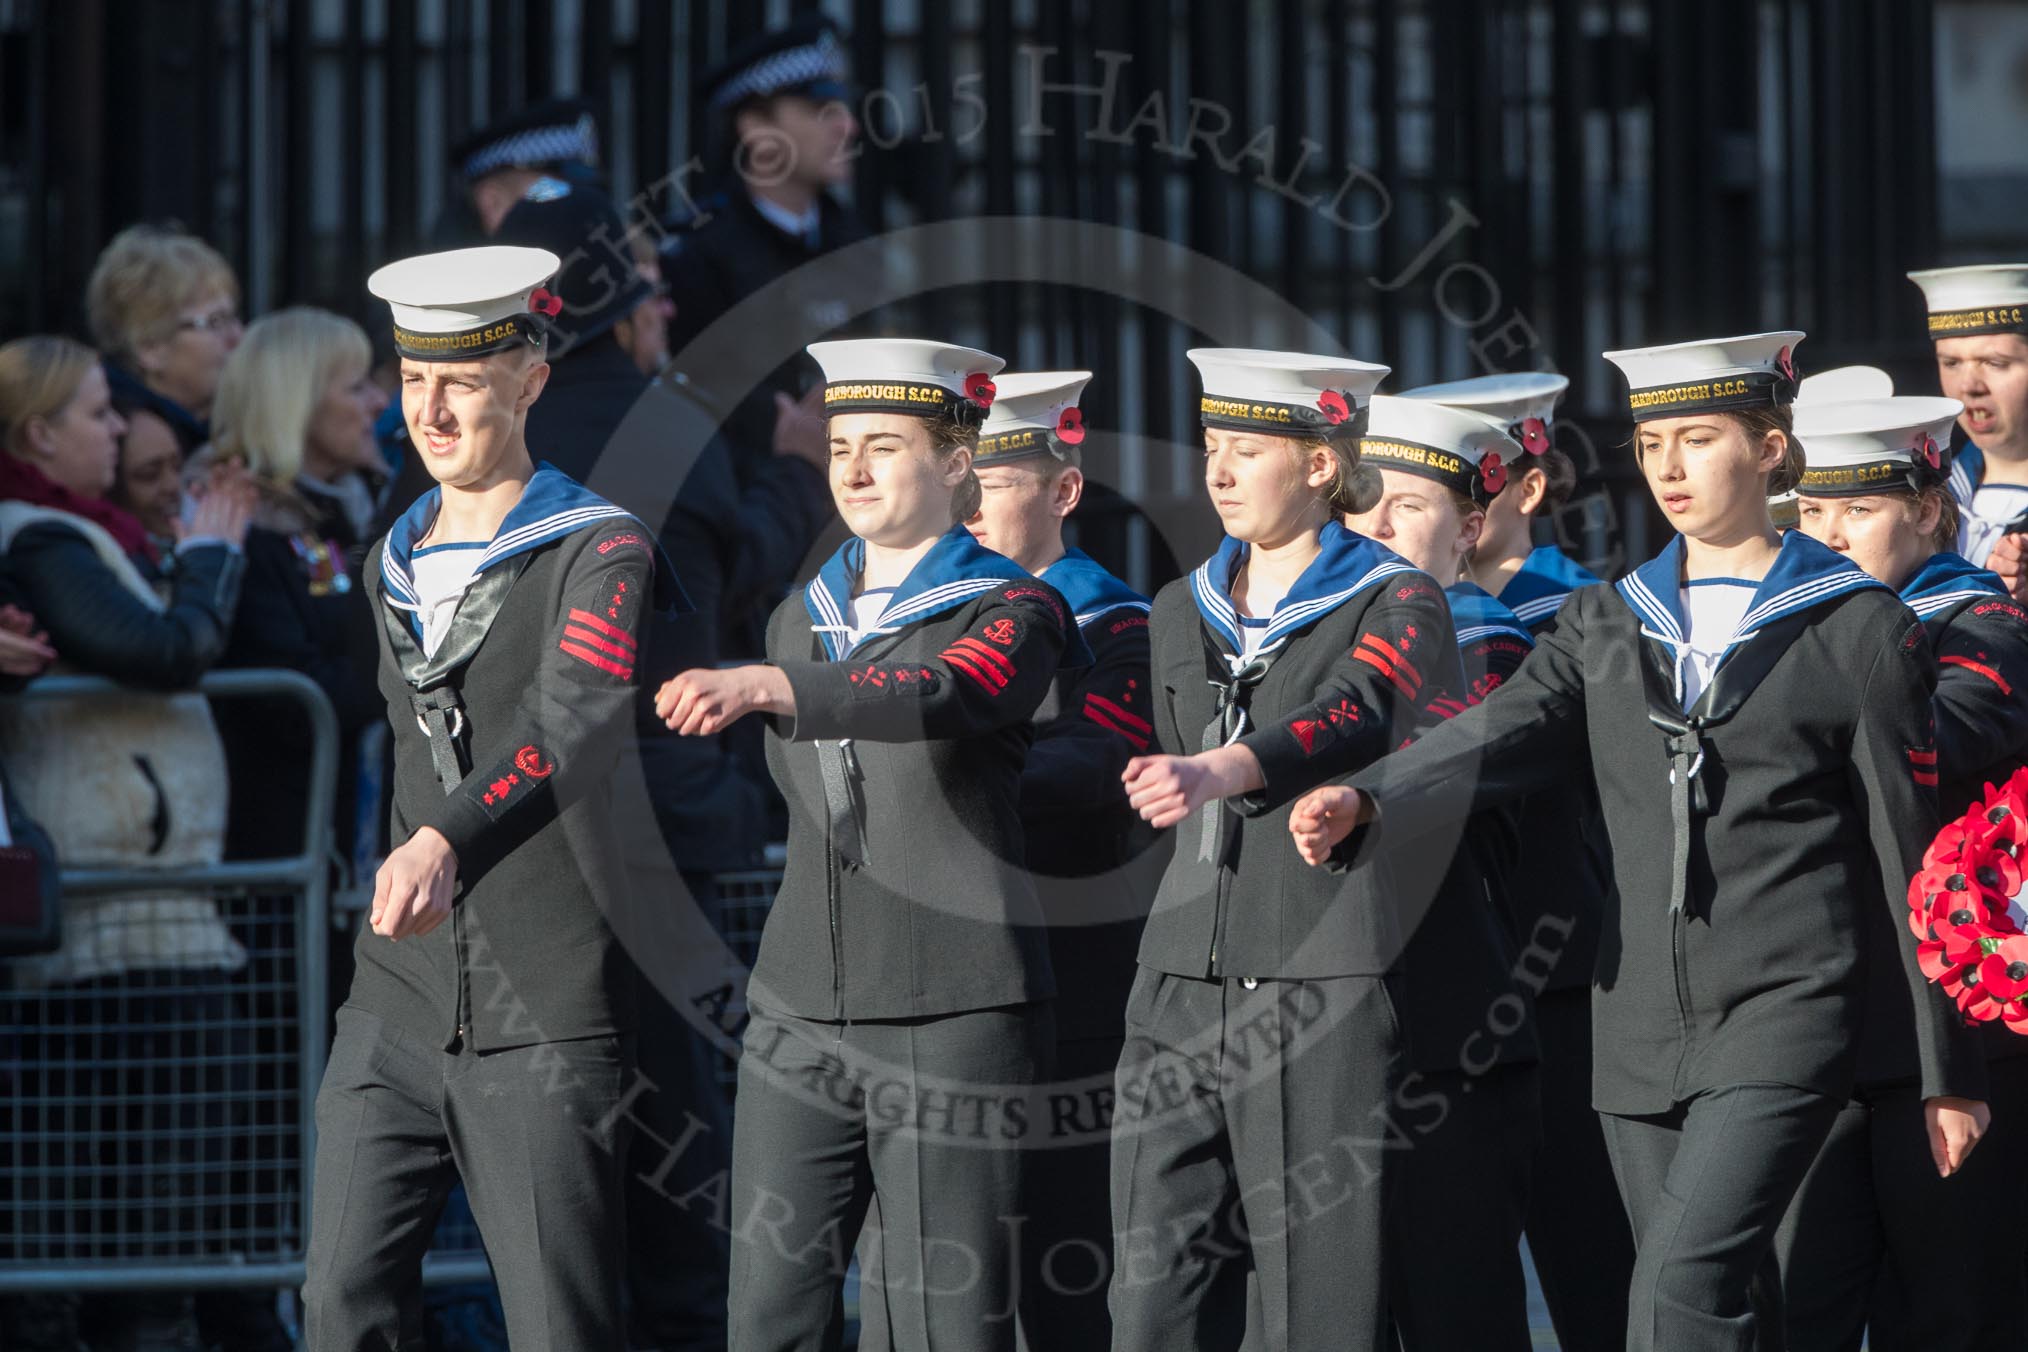 March Past, Remembrance Sunday at the Cenotaph 2016: M32 Army and combined Cadet Force.
Cenotaph, Whitehall, London SW1,
London,
Greater London,
United Kingdom,
on 13 November 2016 at 13:17, image #2783